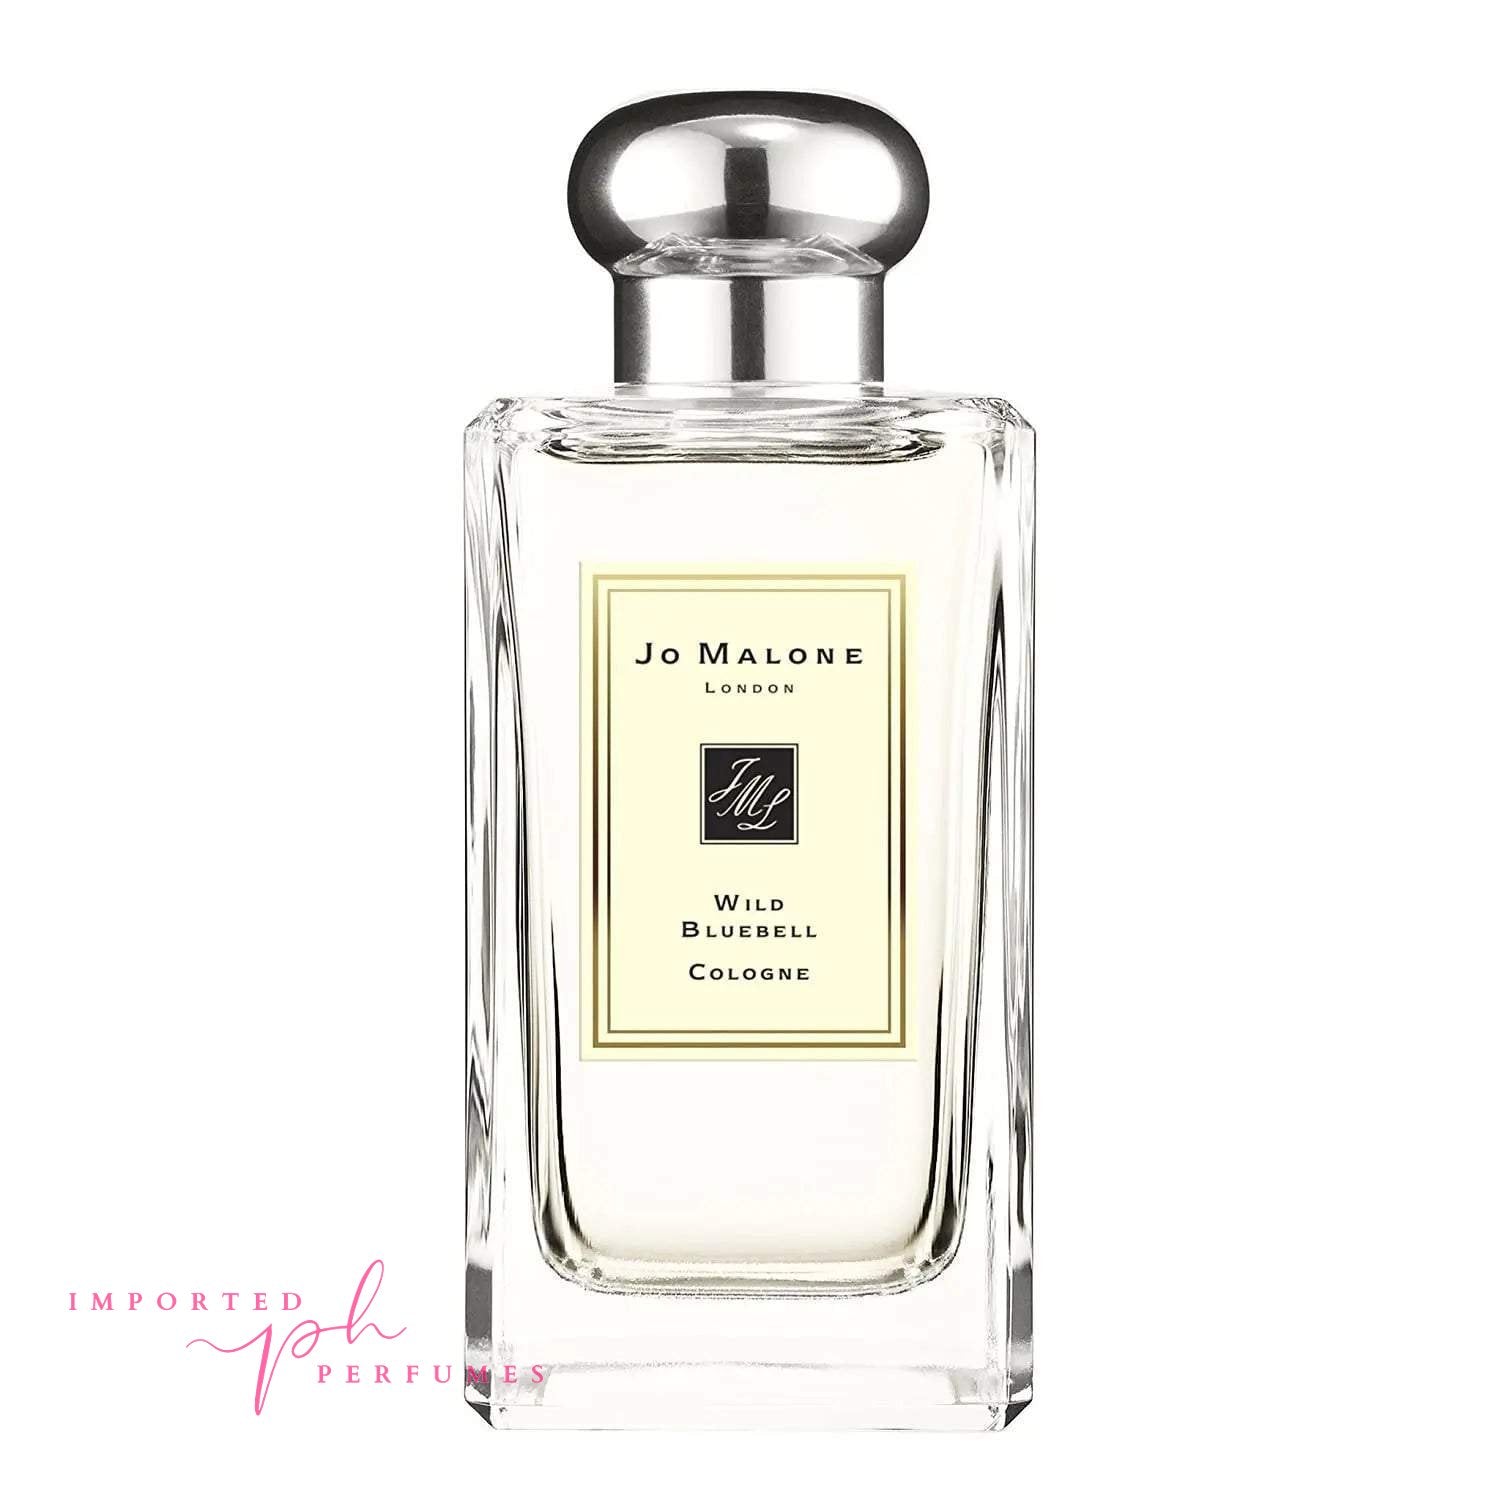 Jo Malone London Wild Bluebell Cologne Spray For Women 100ml-Imported Perfumes Co-jo malone,Jo Malone London,Wild Bluebell,women